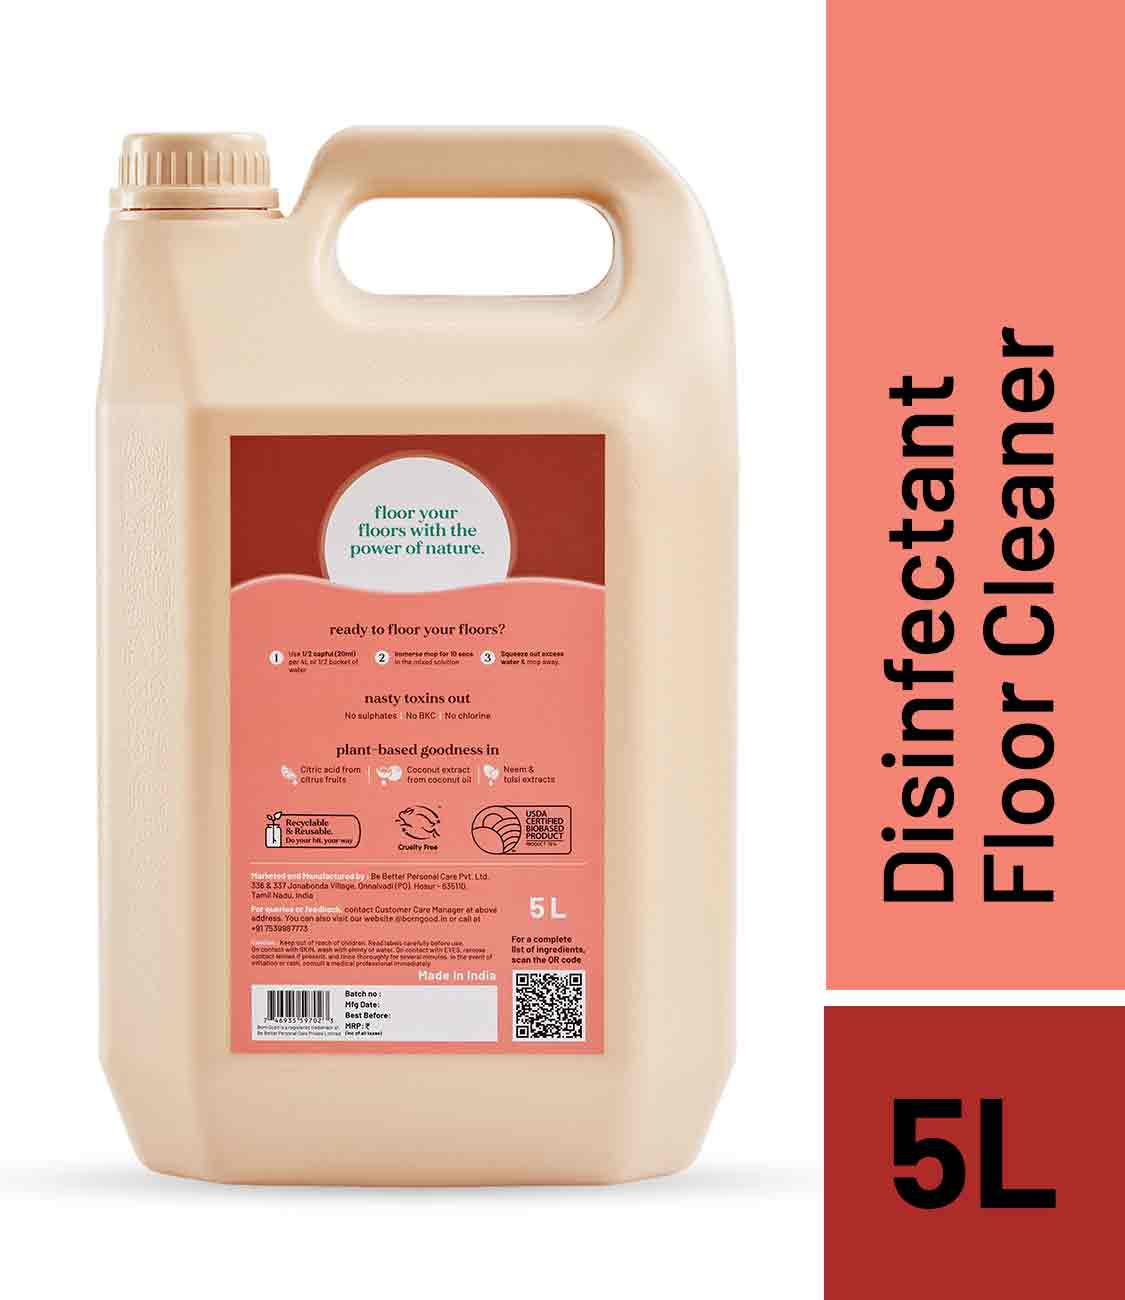 Born Good Plant-based Disinfectant Floor Cleaner - 5 L Can